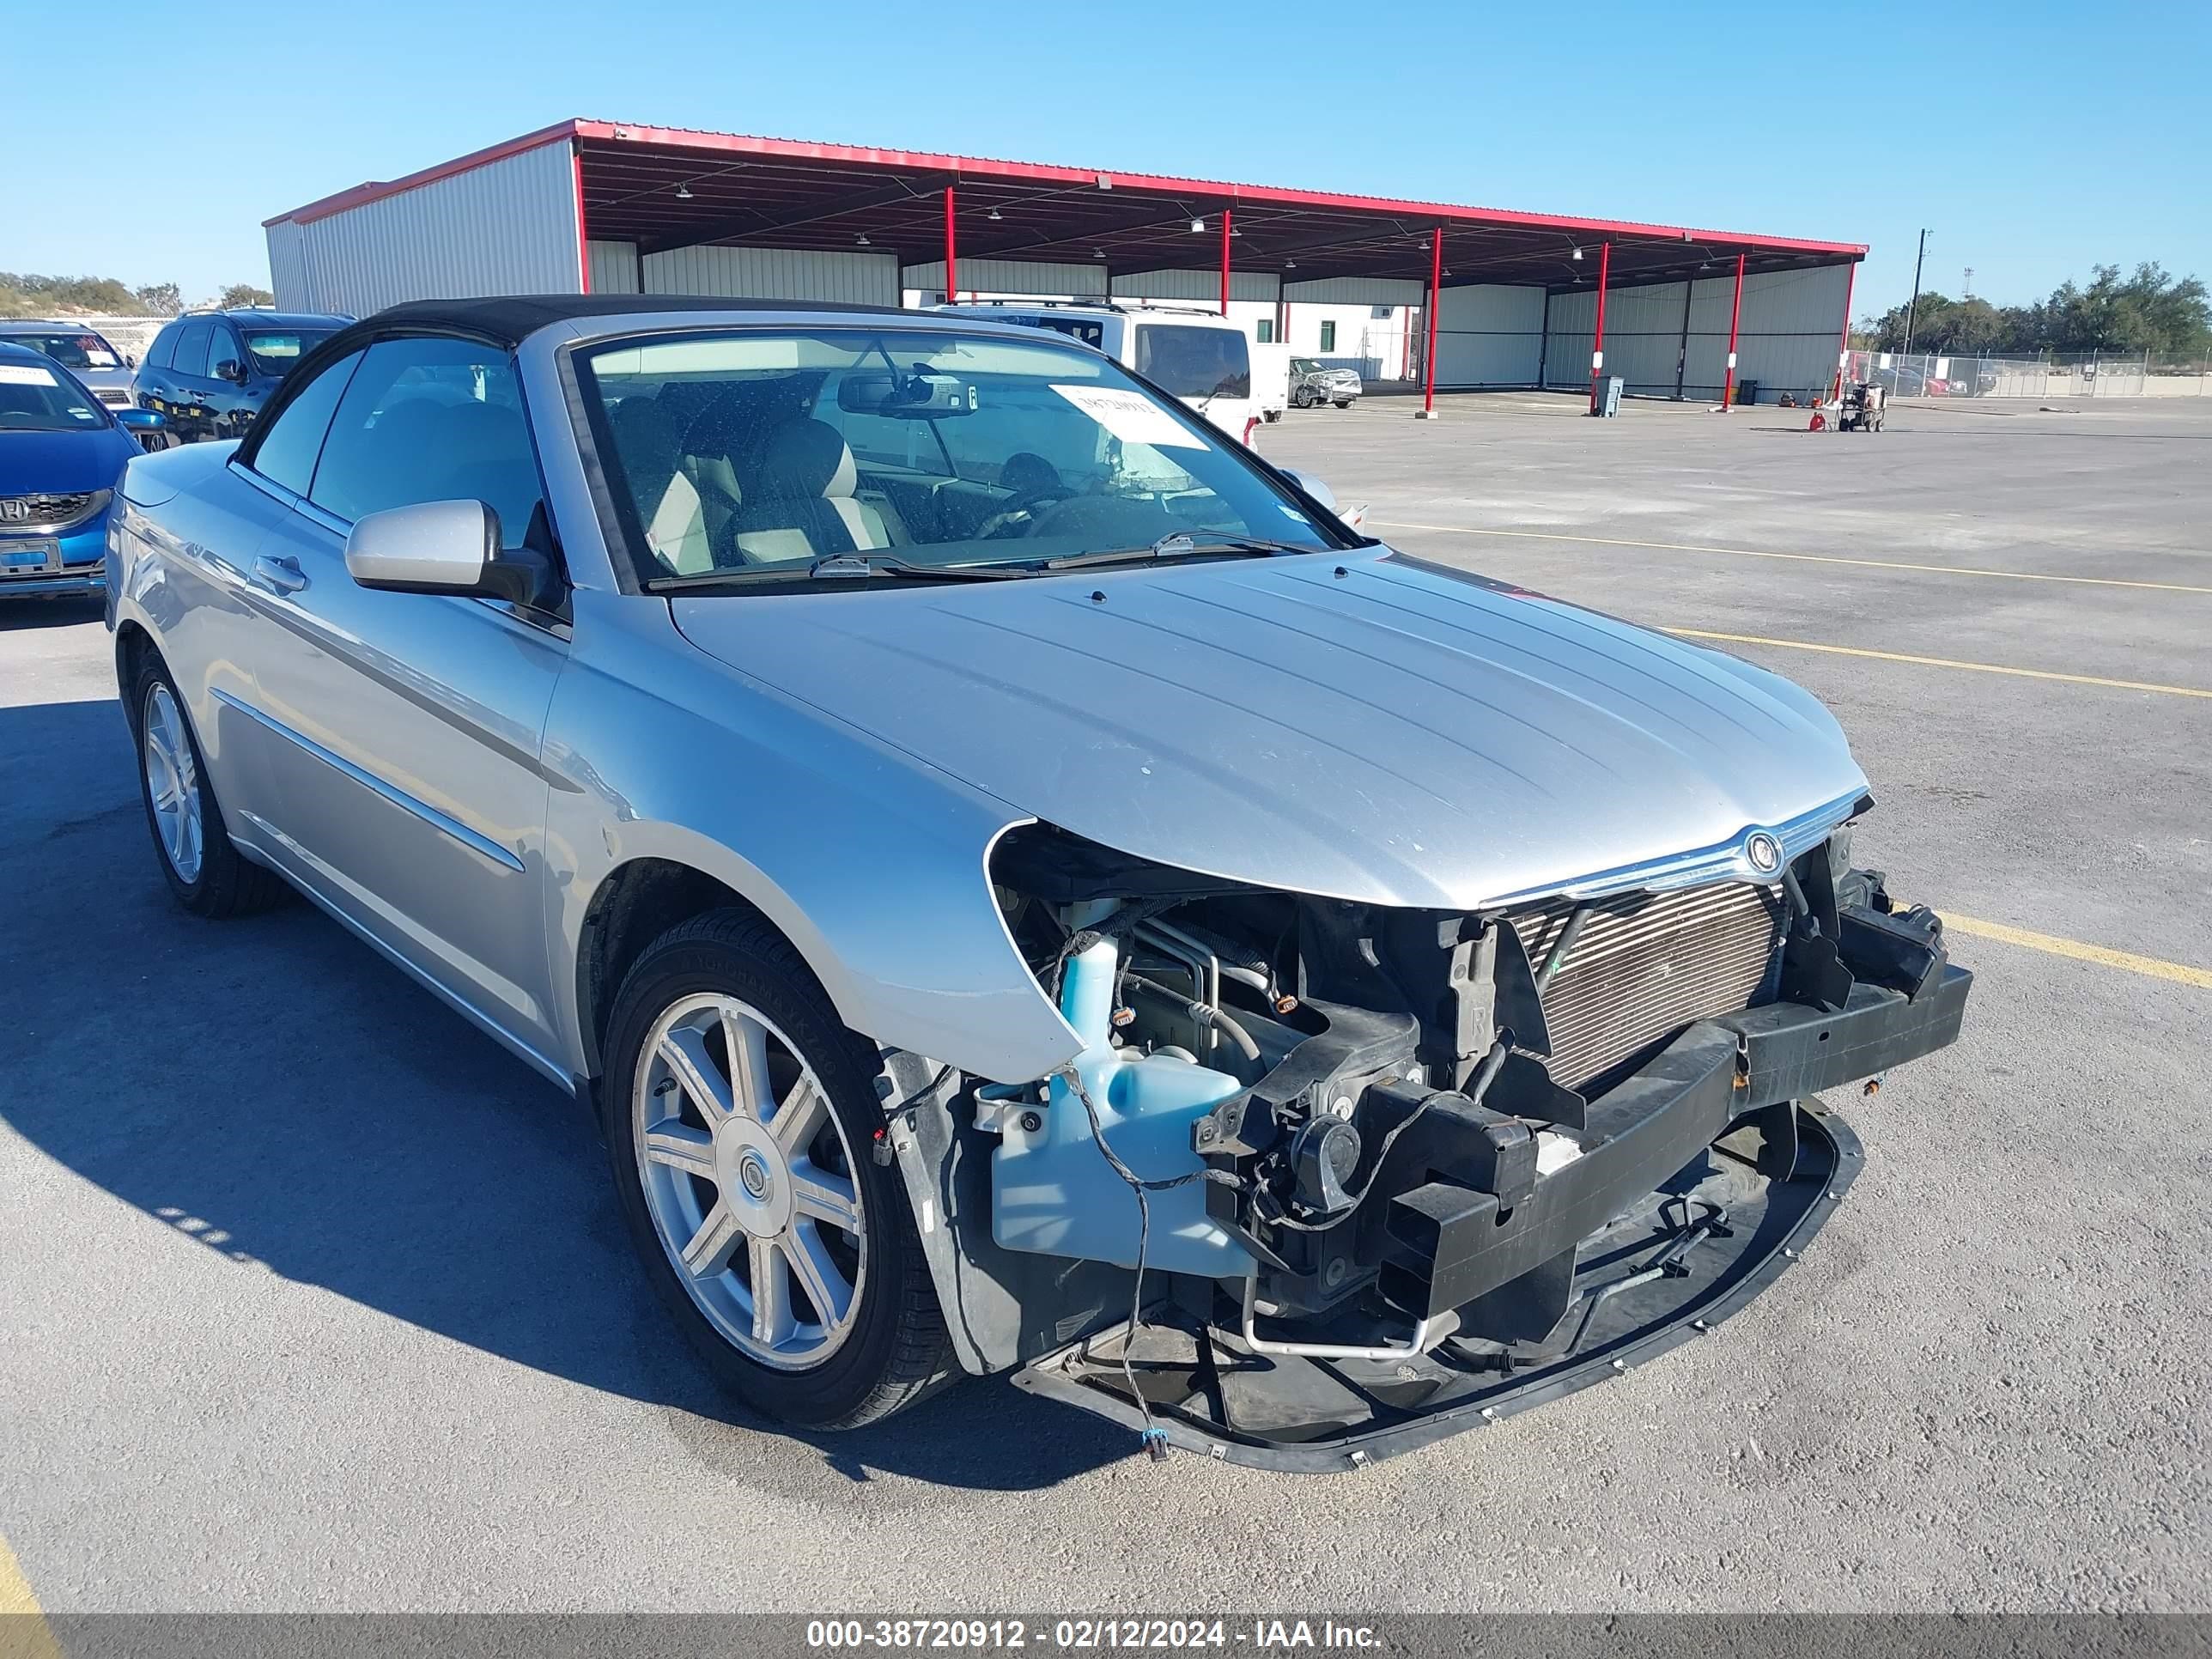 vin: 1C3LC55RX8N629728 1C3LC55RX8N629728 2008 chrysler sebring 2700 for Sale in 76527, 23010 Firefly Rd, Bell County, Texas, USA